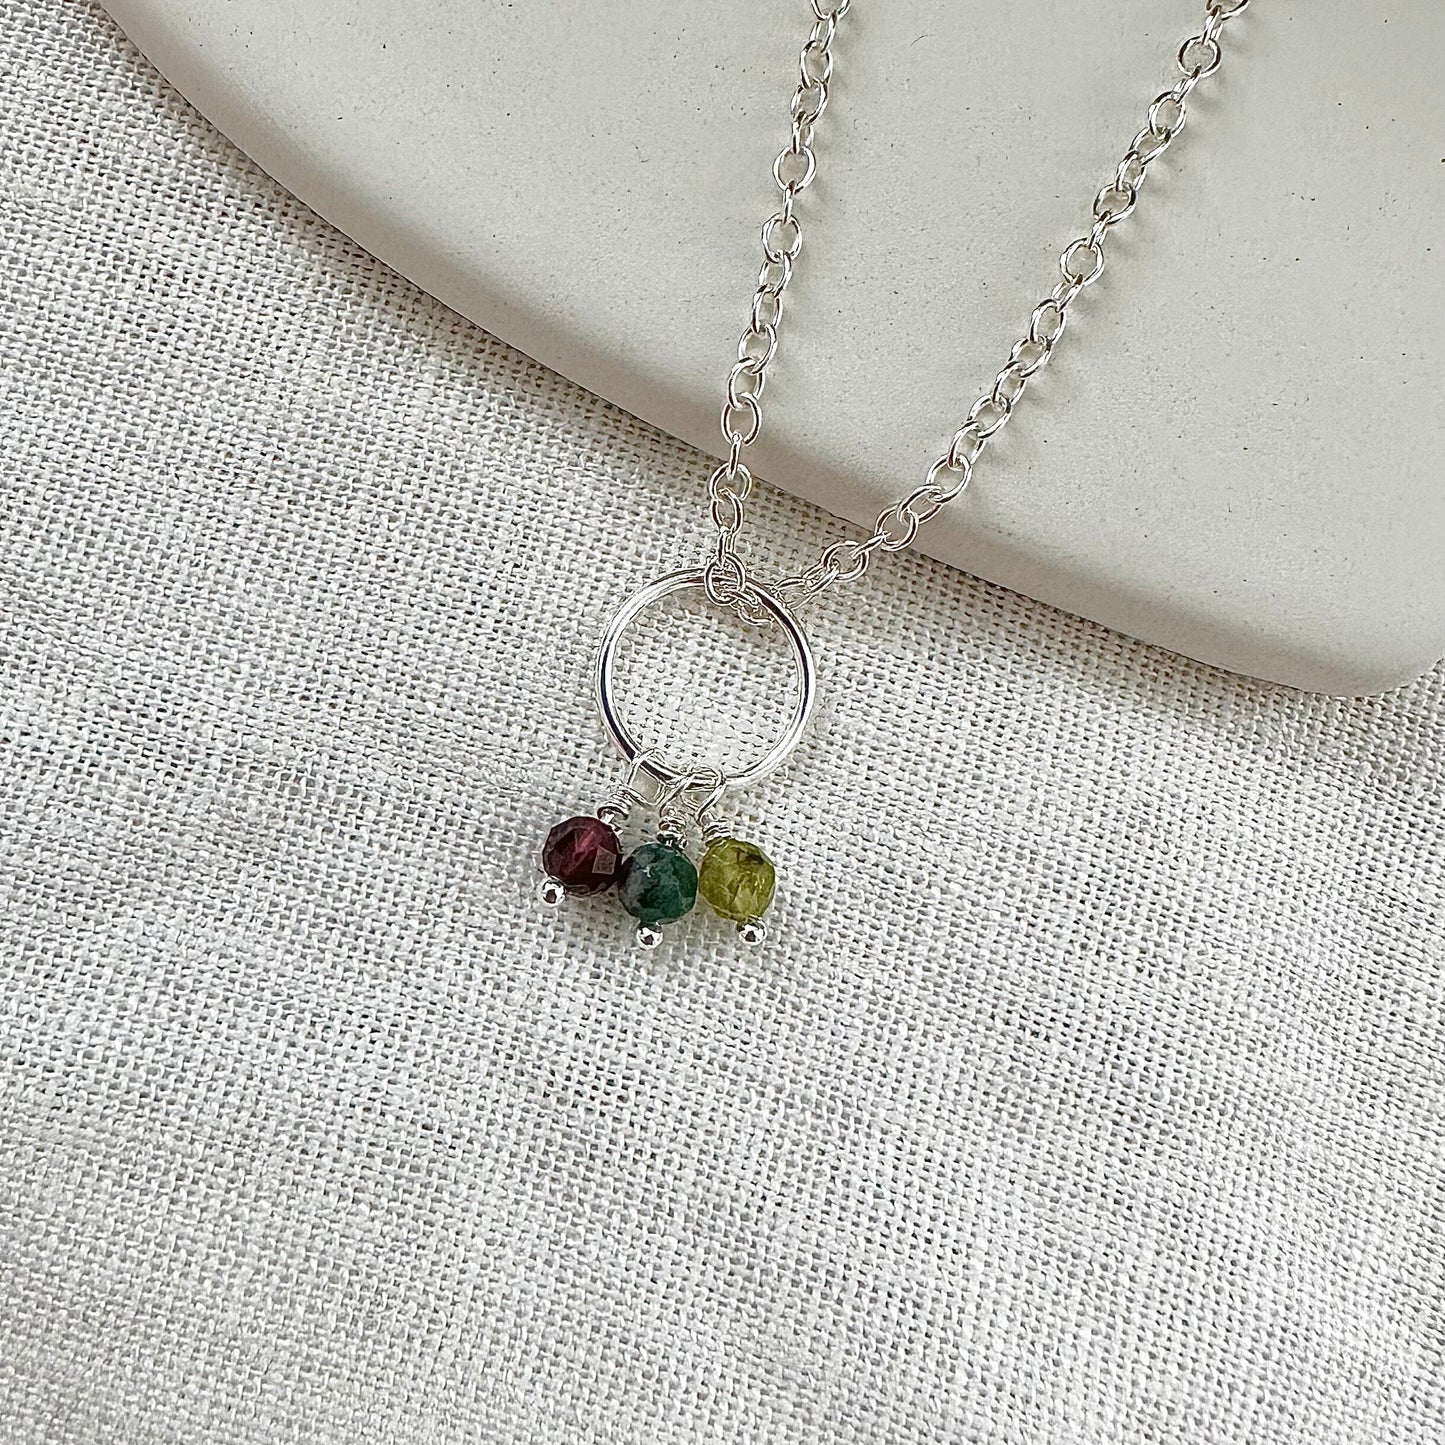 Tiny 4mm Birthstone Charm Necklace, Family Jewellery for Mothers in Sterling Silver